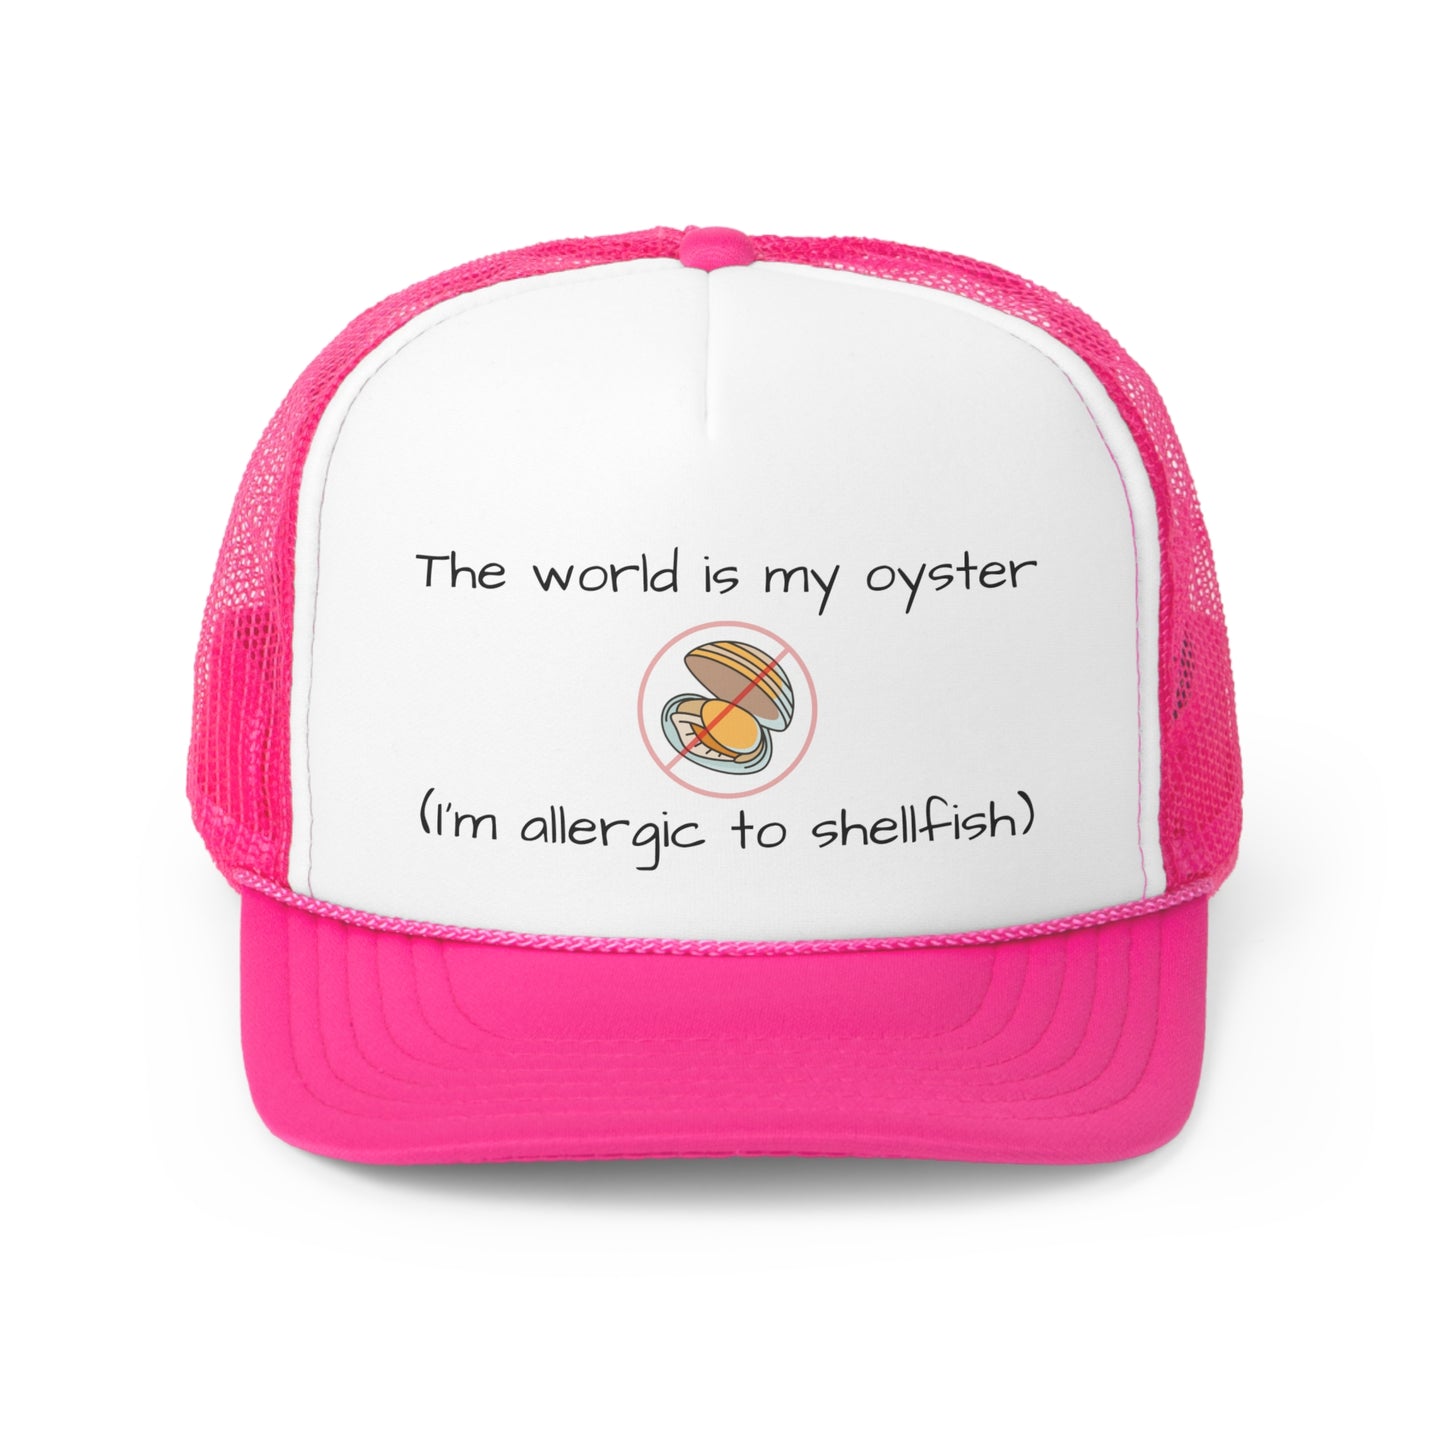 The world is my oyster - trucker hat